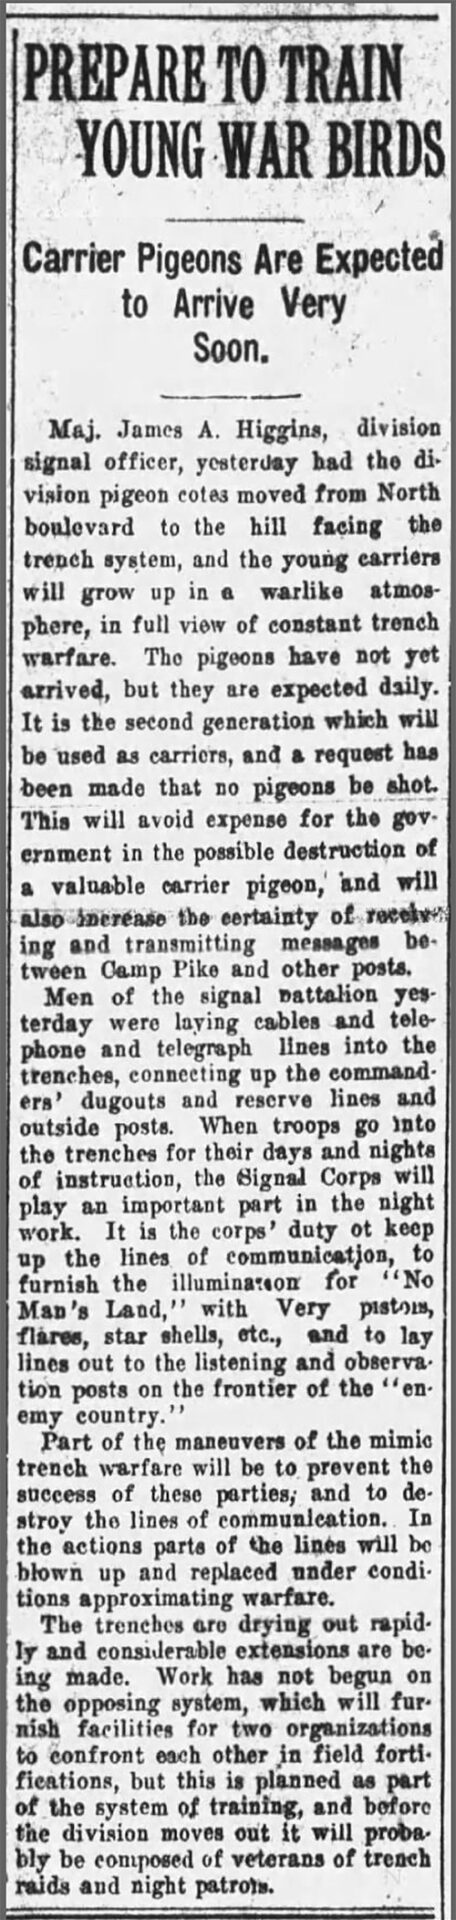 "Prepare to Train Young War Bird" newspaper clipping